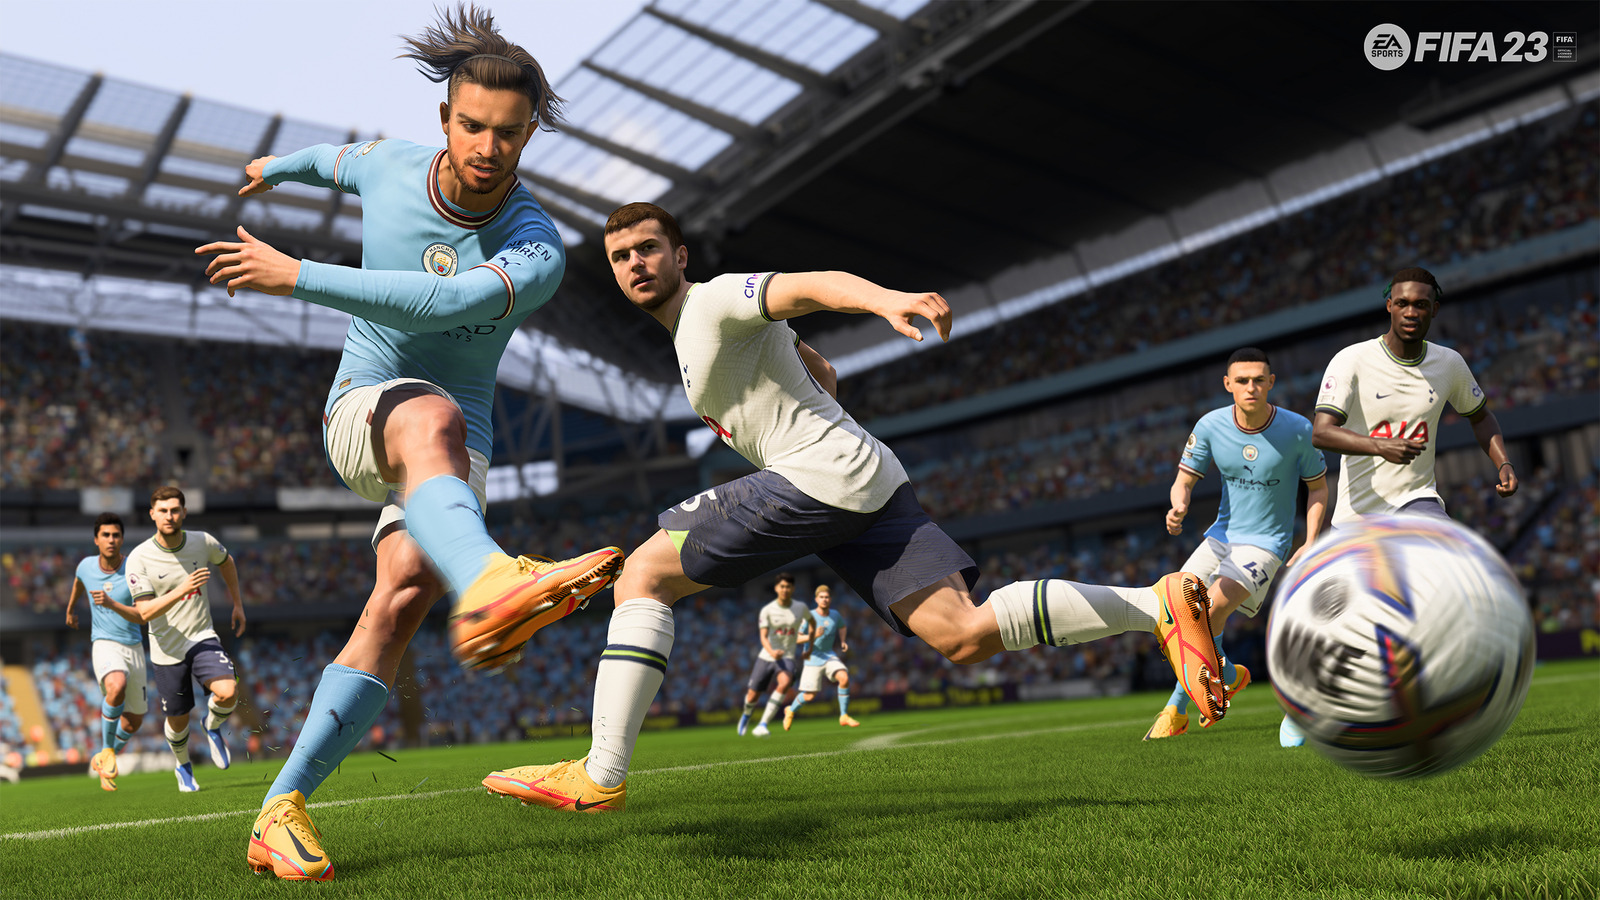 Fifa 23 Ps Plus Here's where you can buy FIFA 23 on console and PC | Eurogamer.net